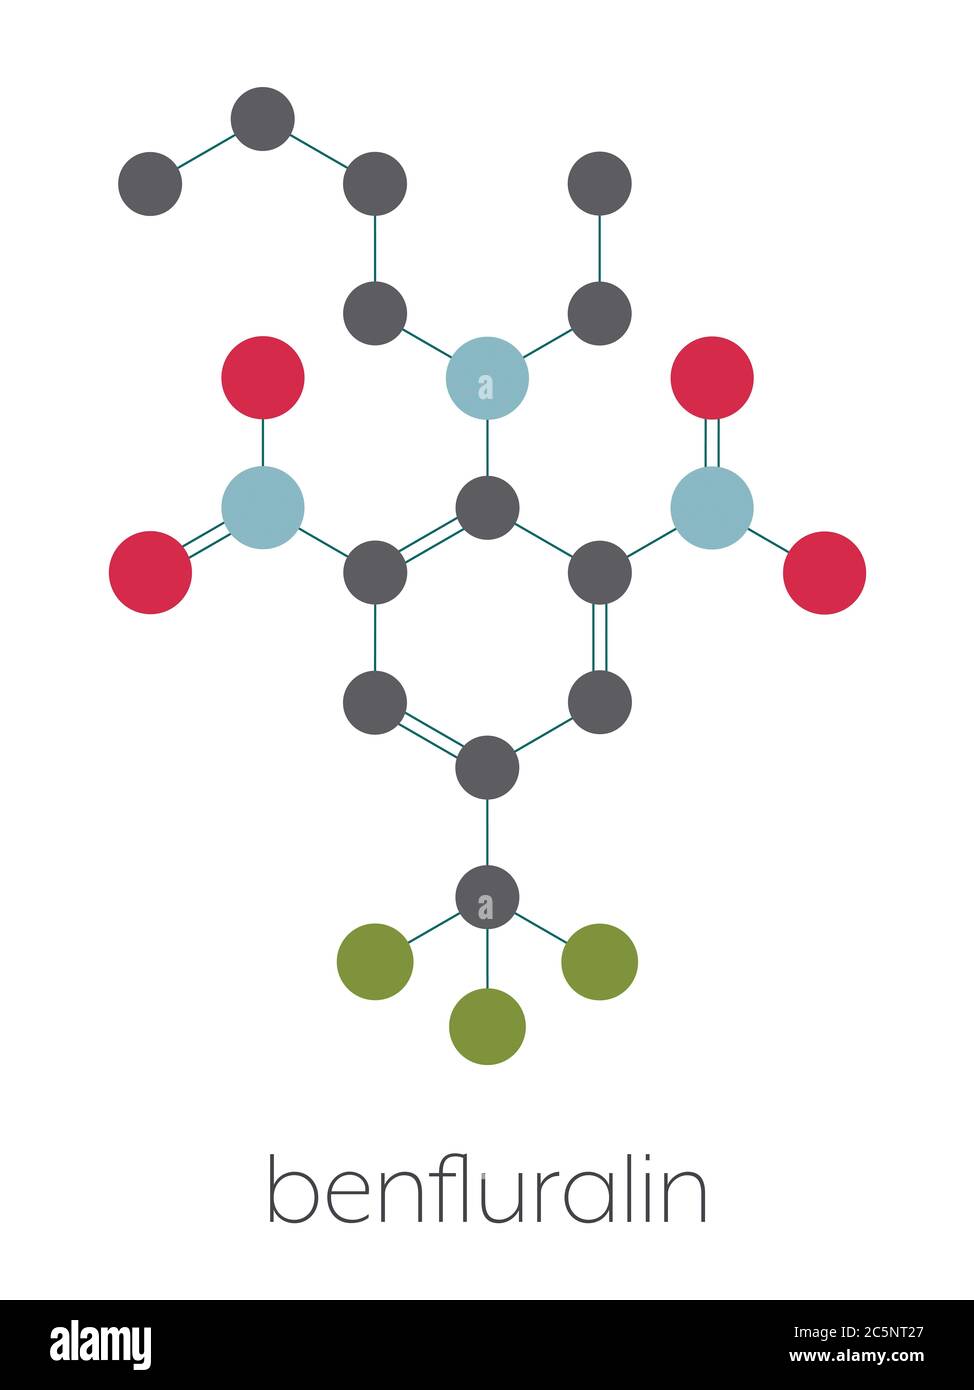 Benfluralin herbicide molecule. Stylized skeletal formula (chemical structure): Atoms are shown as color-coded circles: hydrogen (hidden), carbon (grey), oxygen (red), nitrogen (blue), fluorine (cyan). Stock Photo